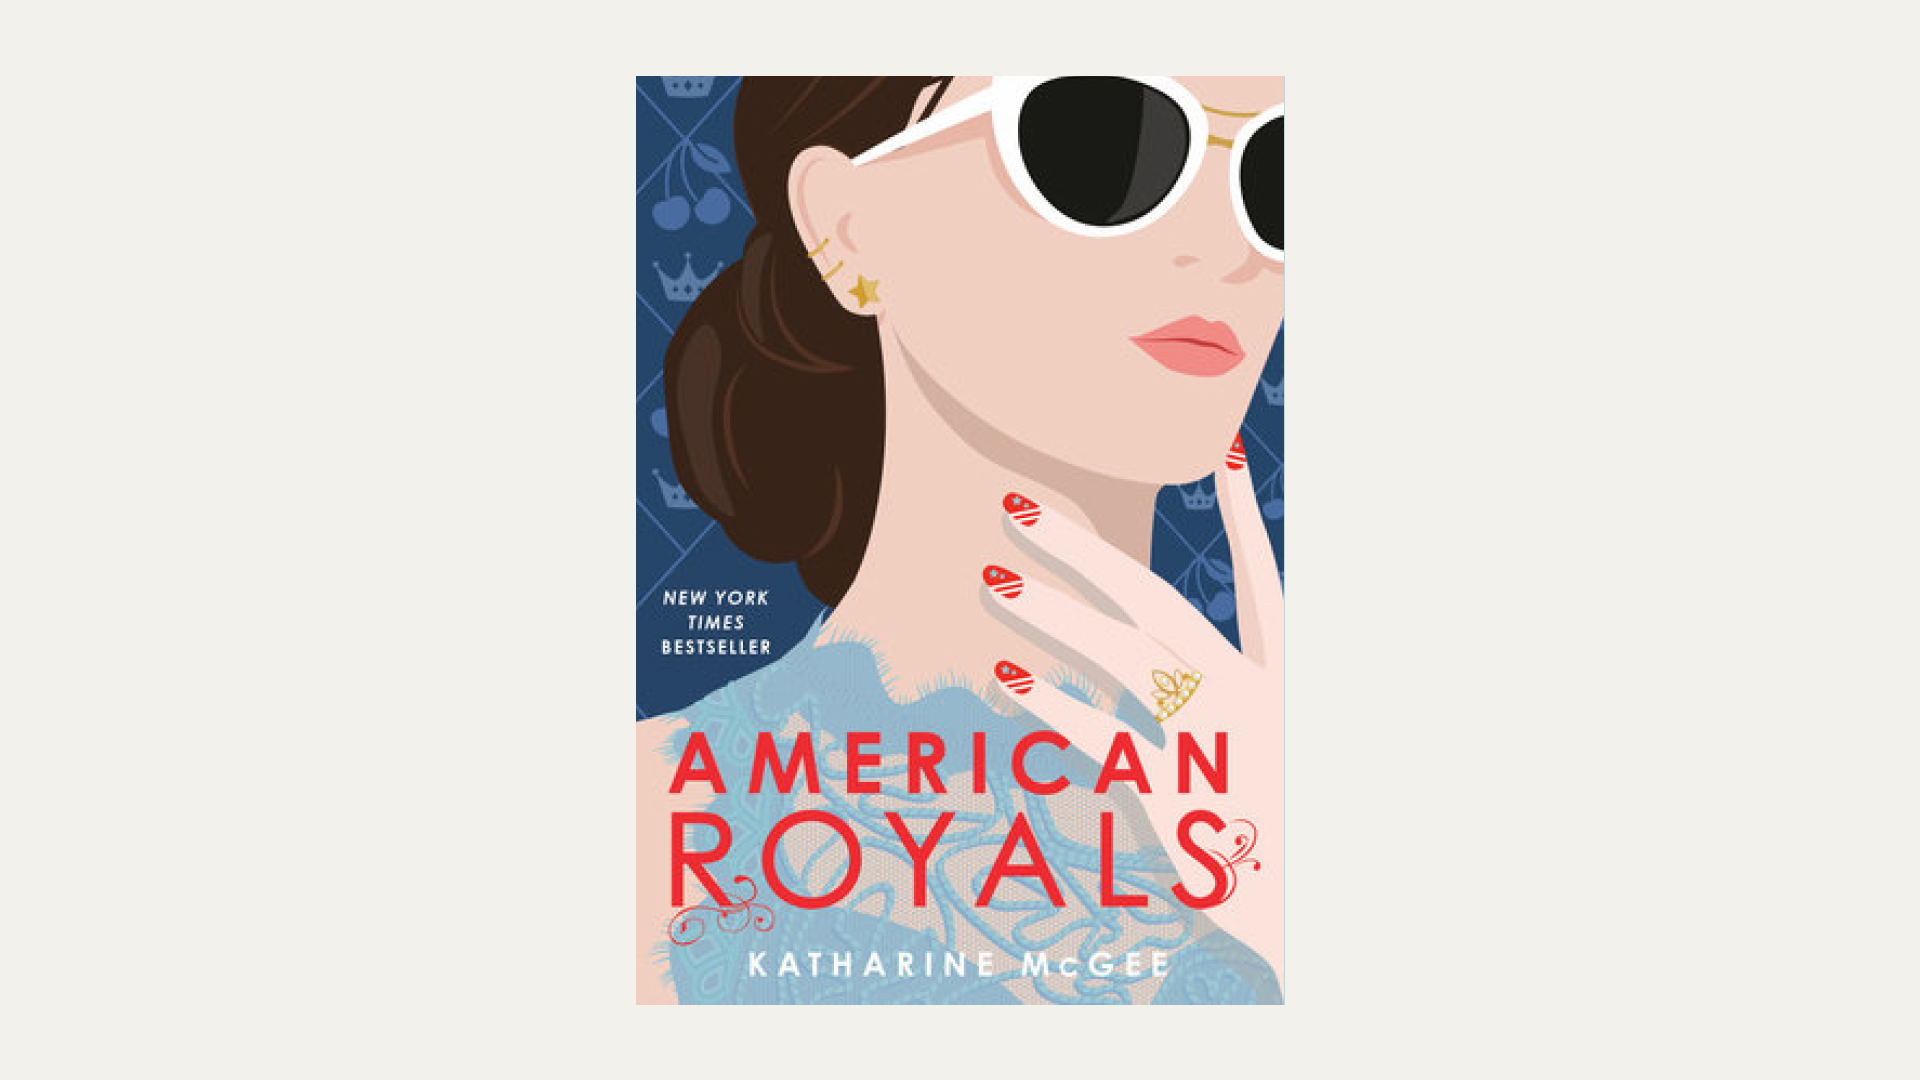 "American Royals" by Katharine McGee 